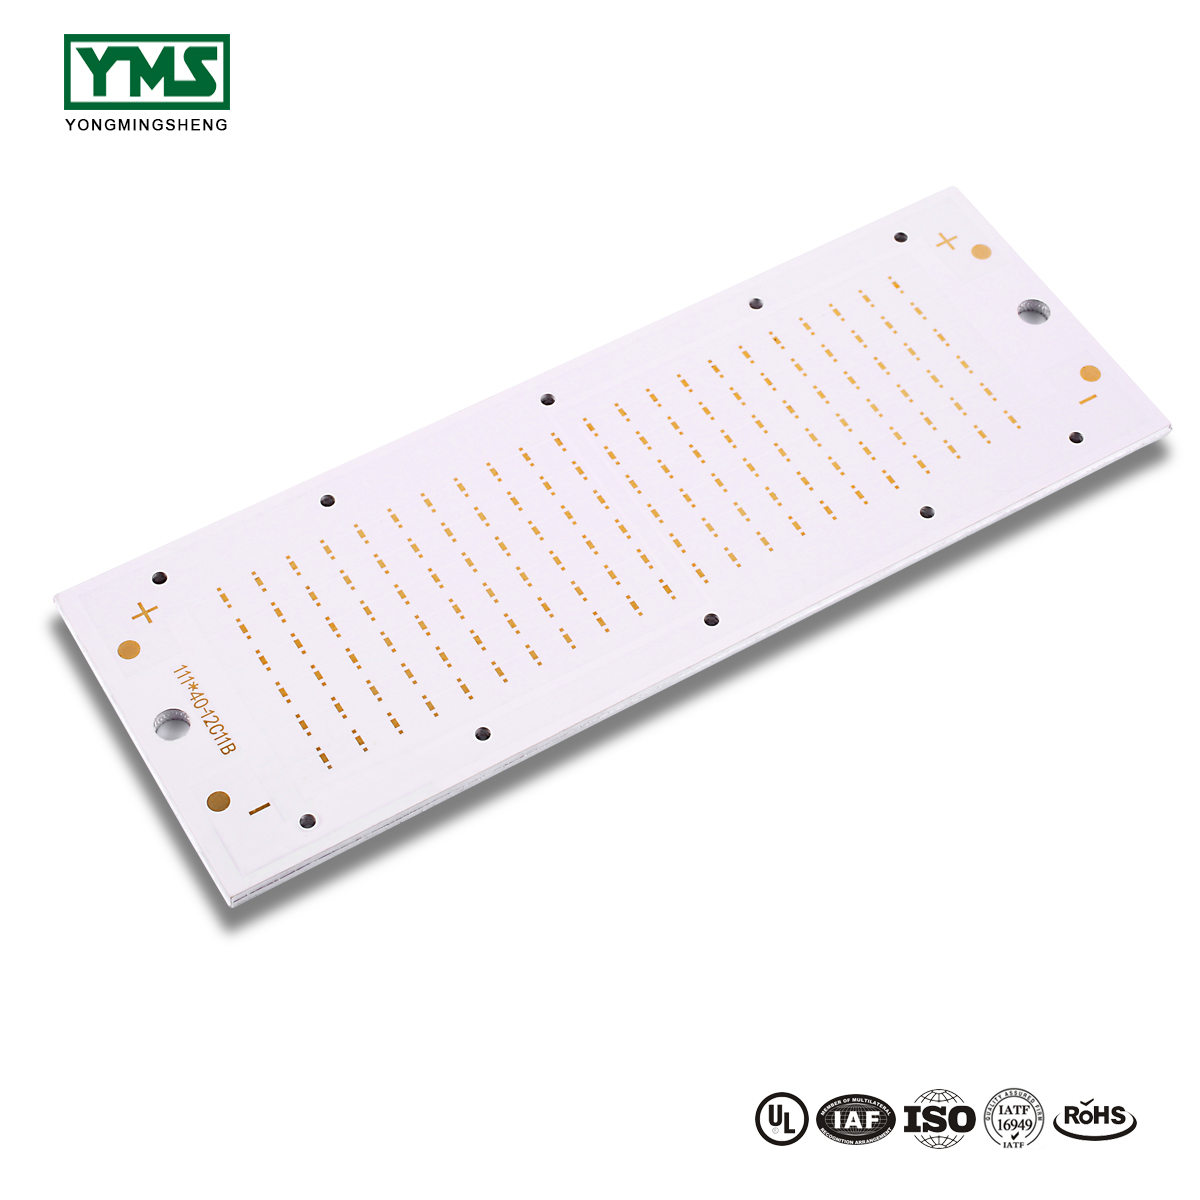 Factory wholesale Single Layer Fpc - 1Layer Aluminum base Board | YMSPCB – Yongmingsheng